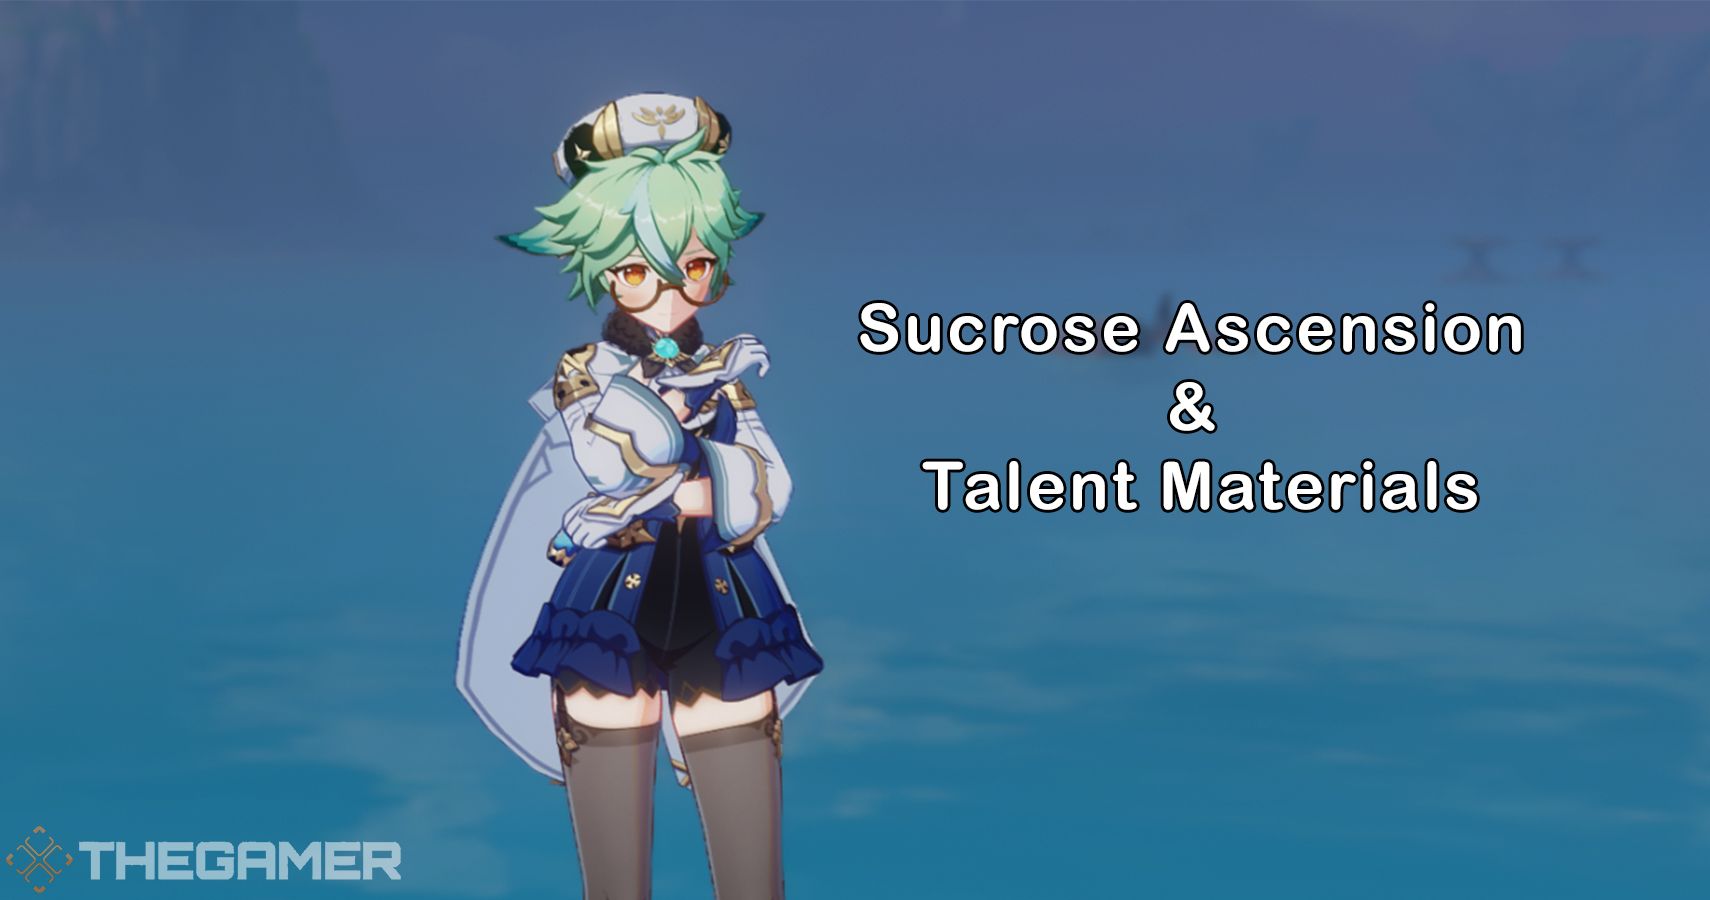 Here are the Genshin Impact Ayato Ascension and Talent Materials